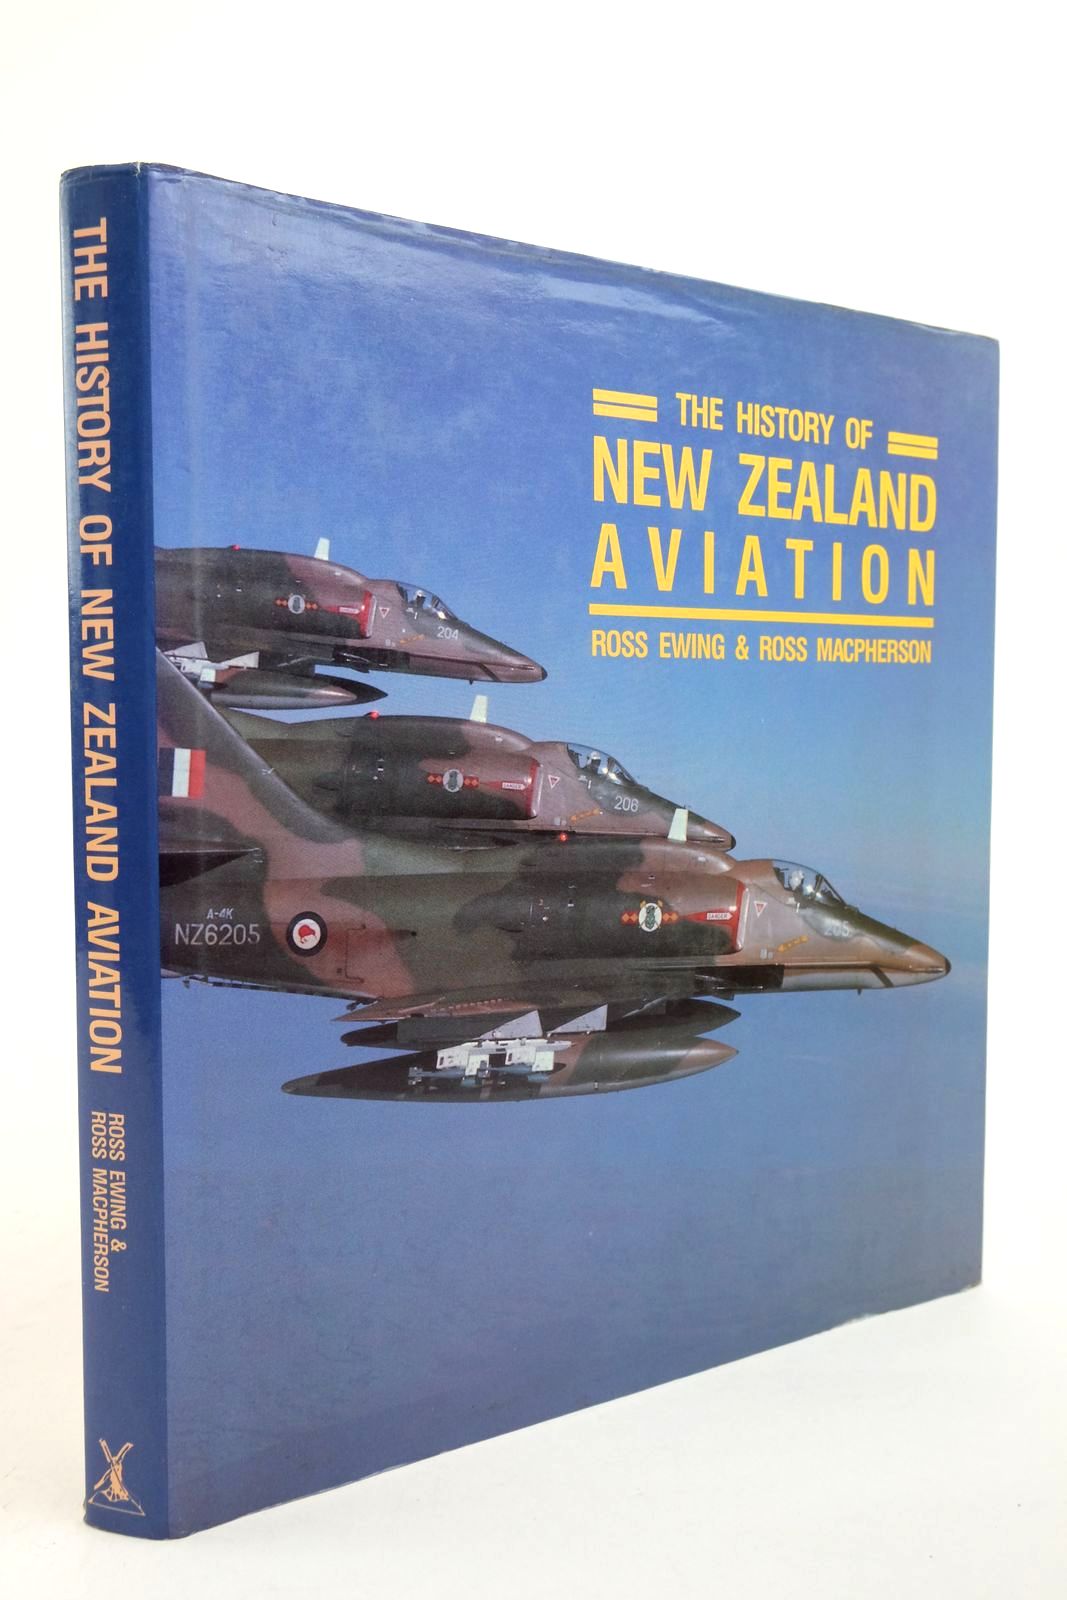 Photo of THE HISTORY OF NEW ZEALAND AVIATION written by Ewing, Ross
Macpherson, Ross published by Heinemann (STOCK CODE: 2139847)  for sale by Stella & Rose's Books